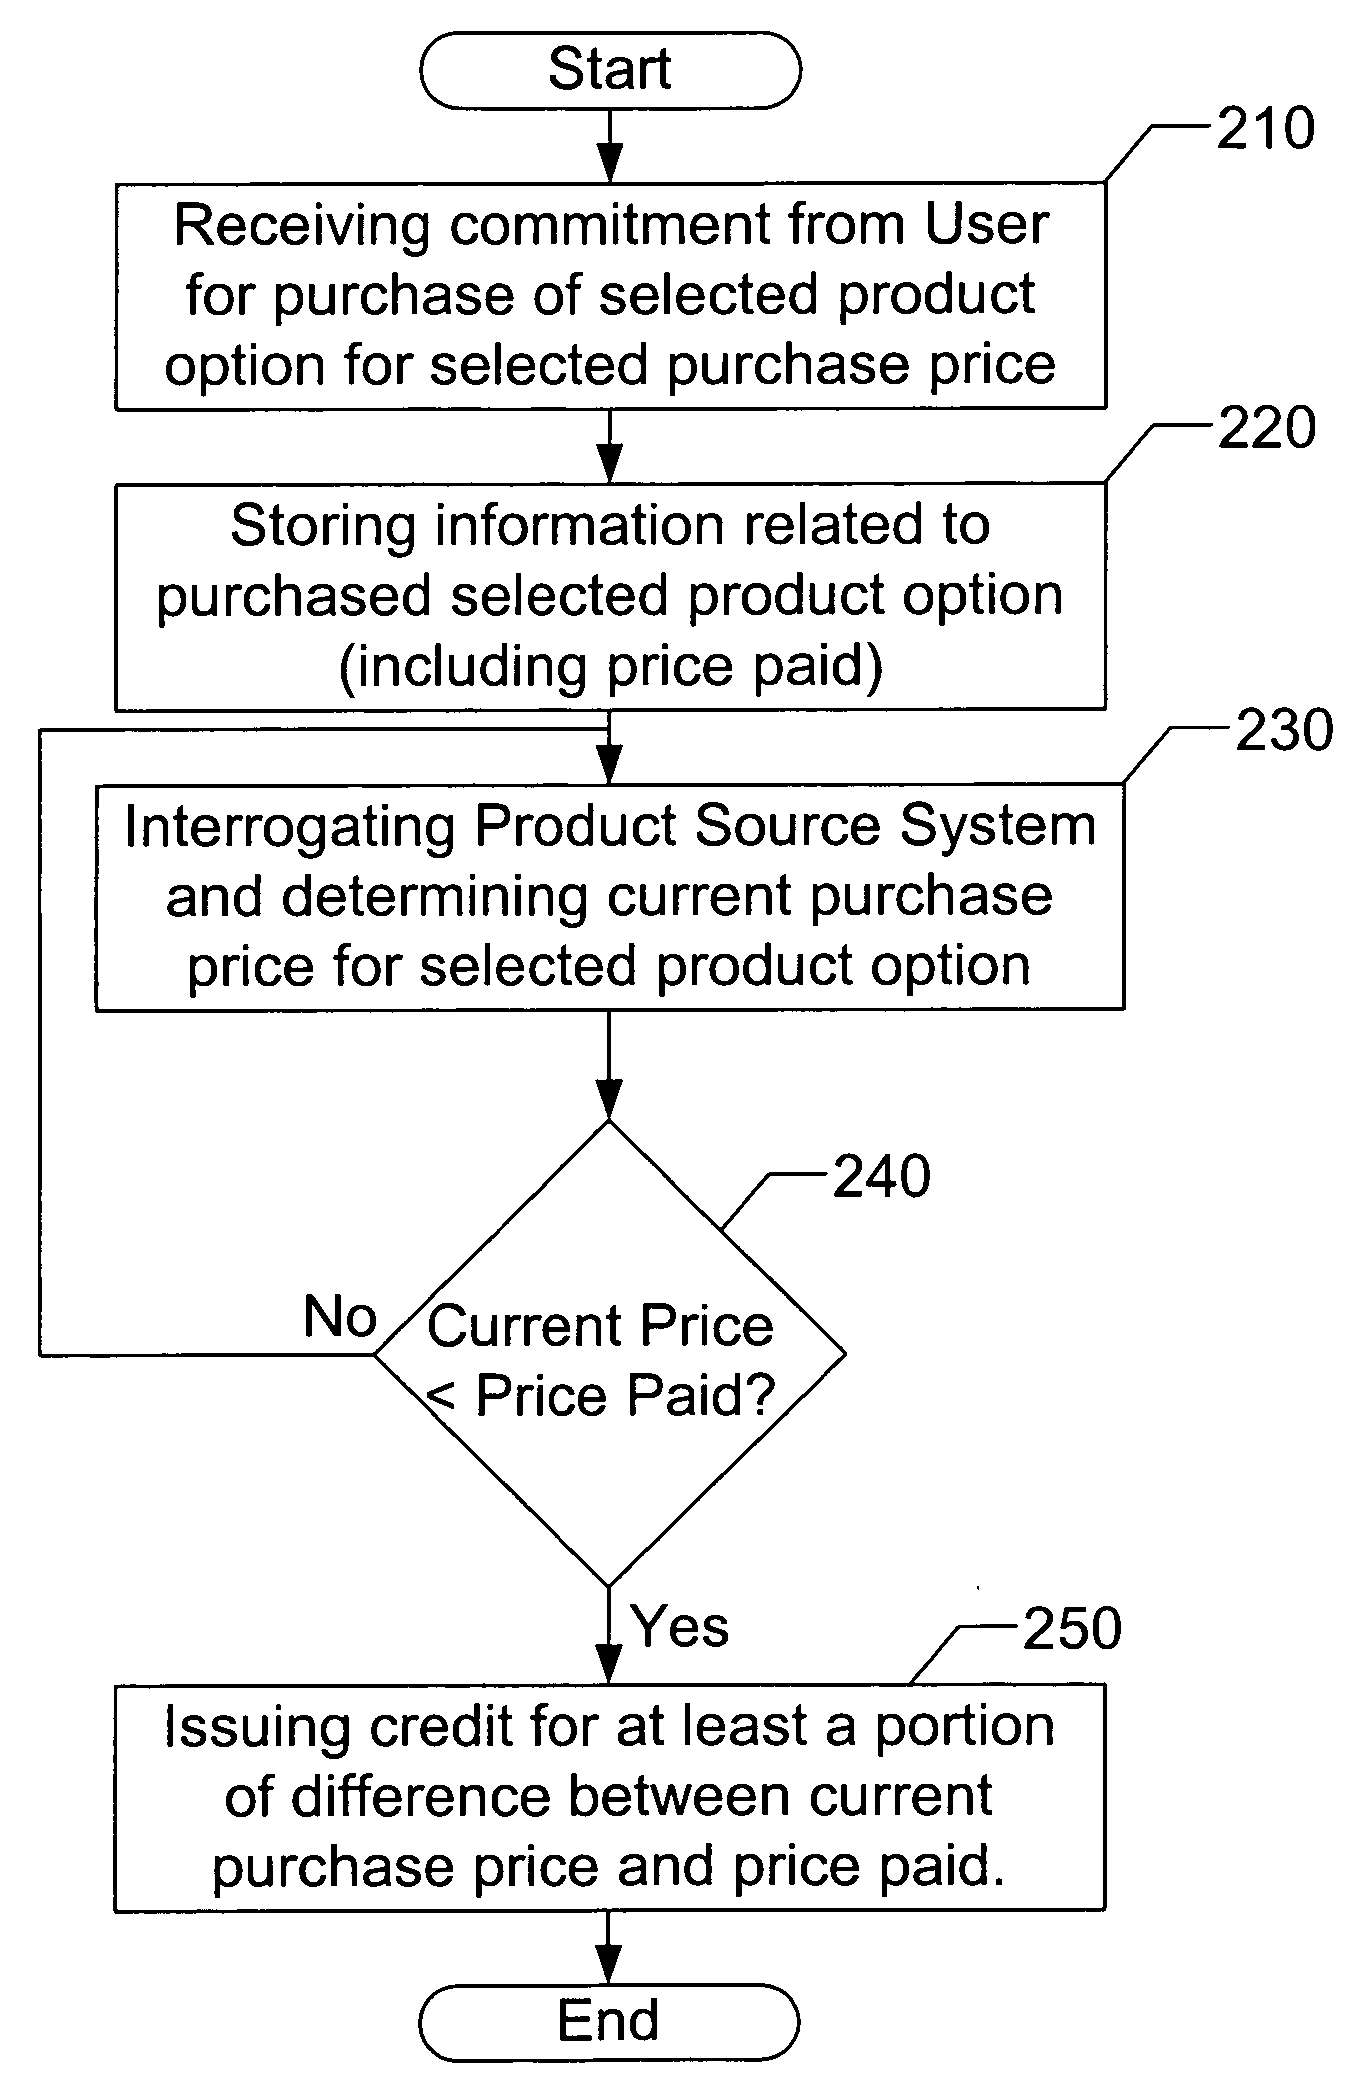 Systems, methods, and computer program products for relieving usage overloads in computer inventory systems by detecting and relaying pricing changes to a user